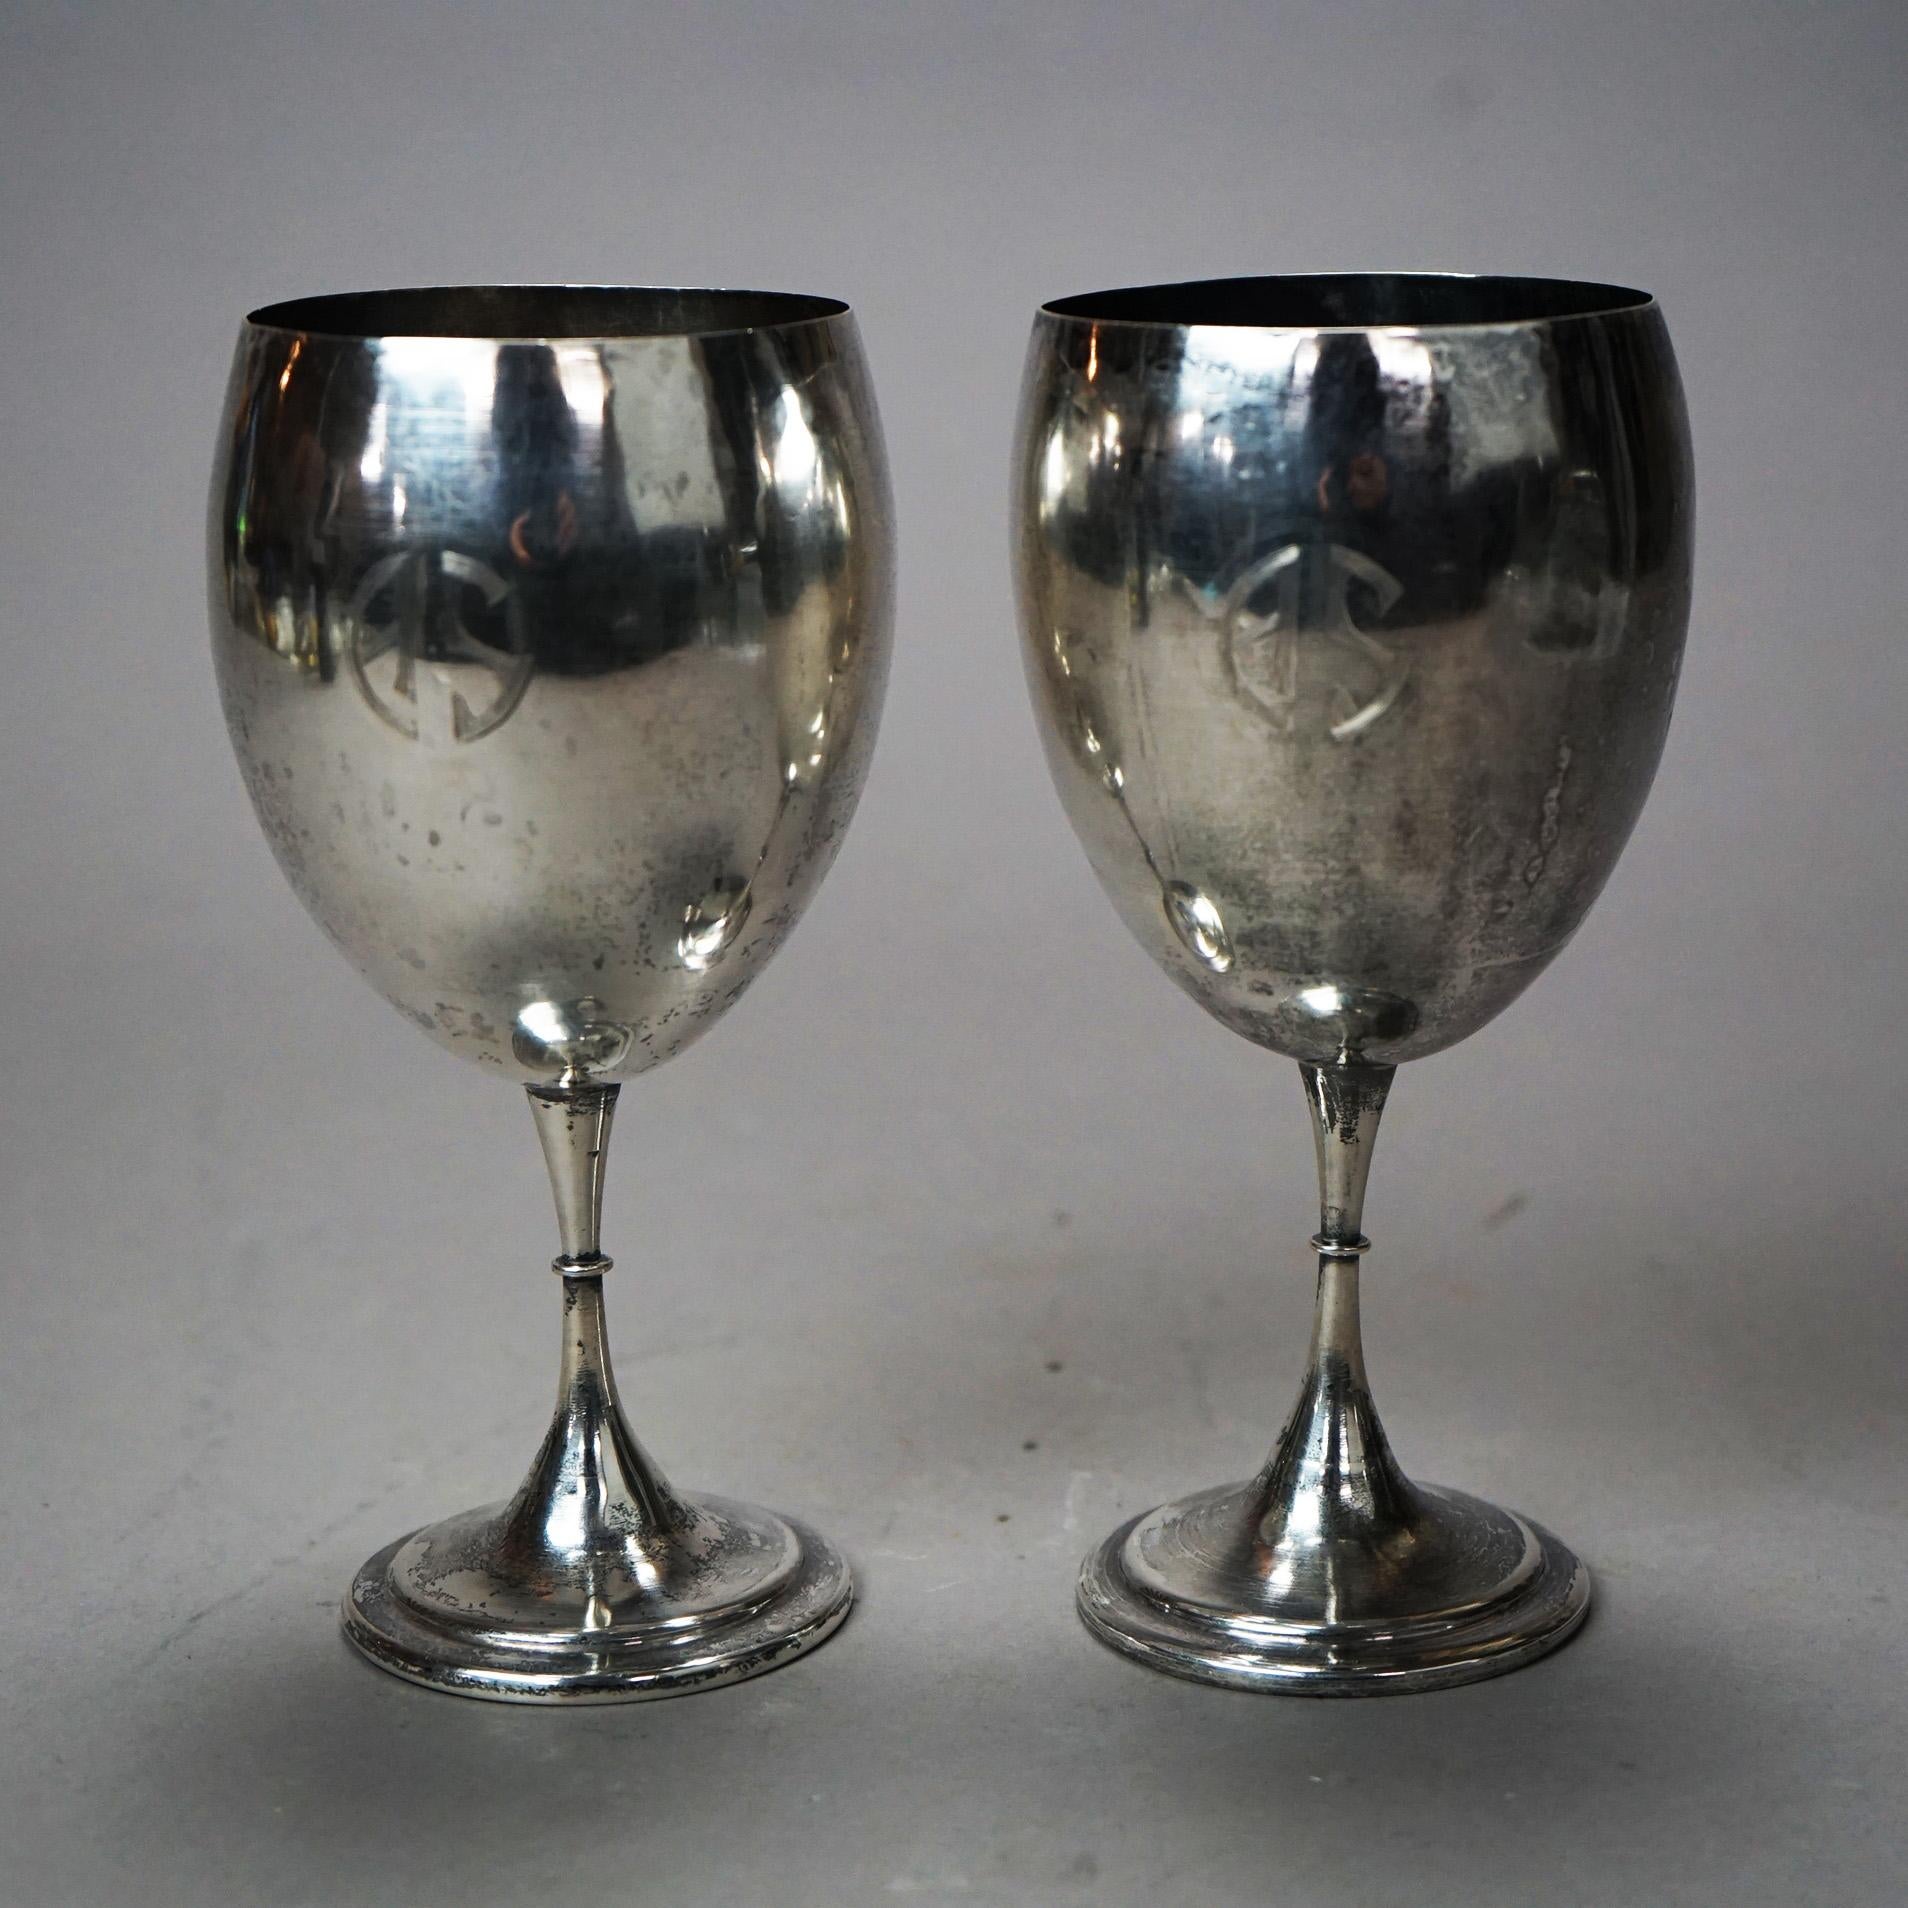 20th Century Pair Antique Arts & Crafts Sterling Silver Goblets, Monogram AS, A. Stone (attr)